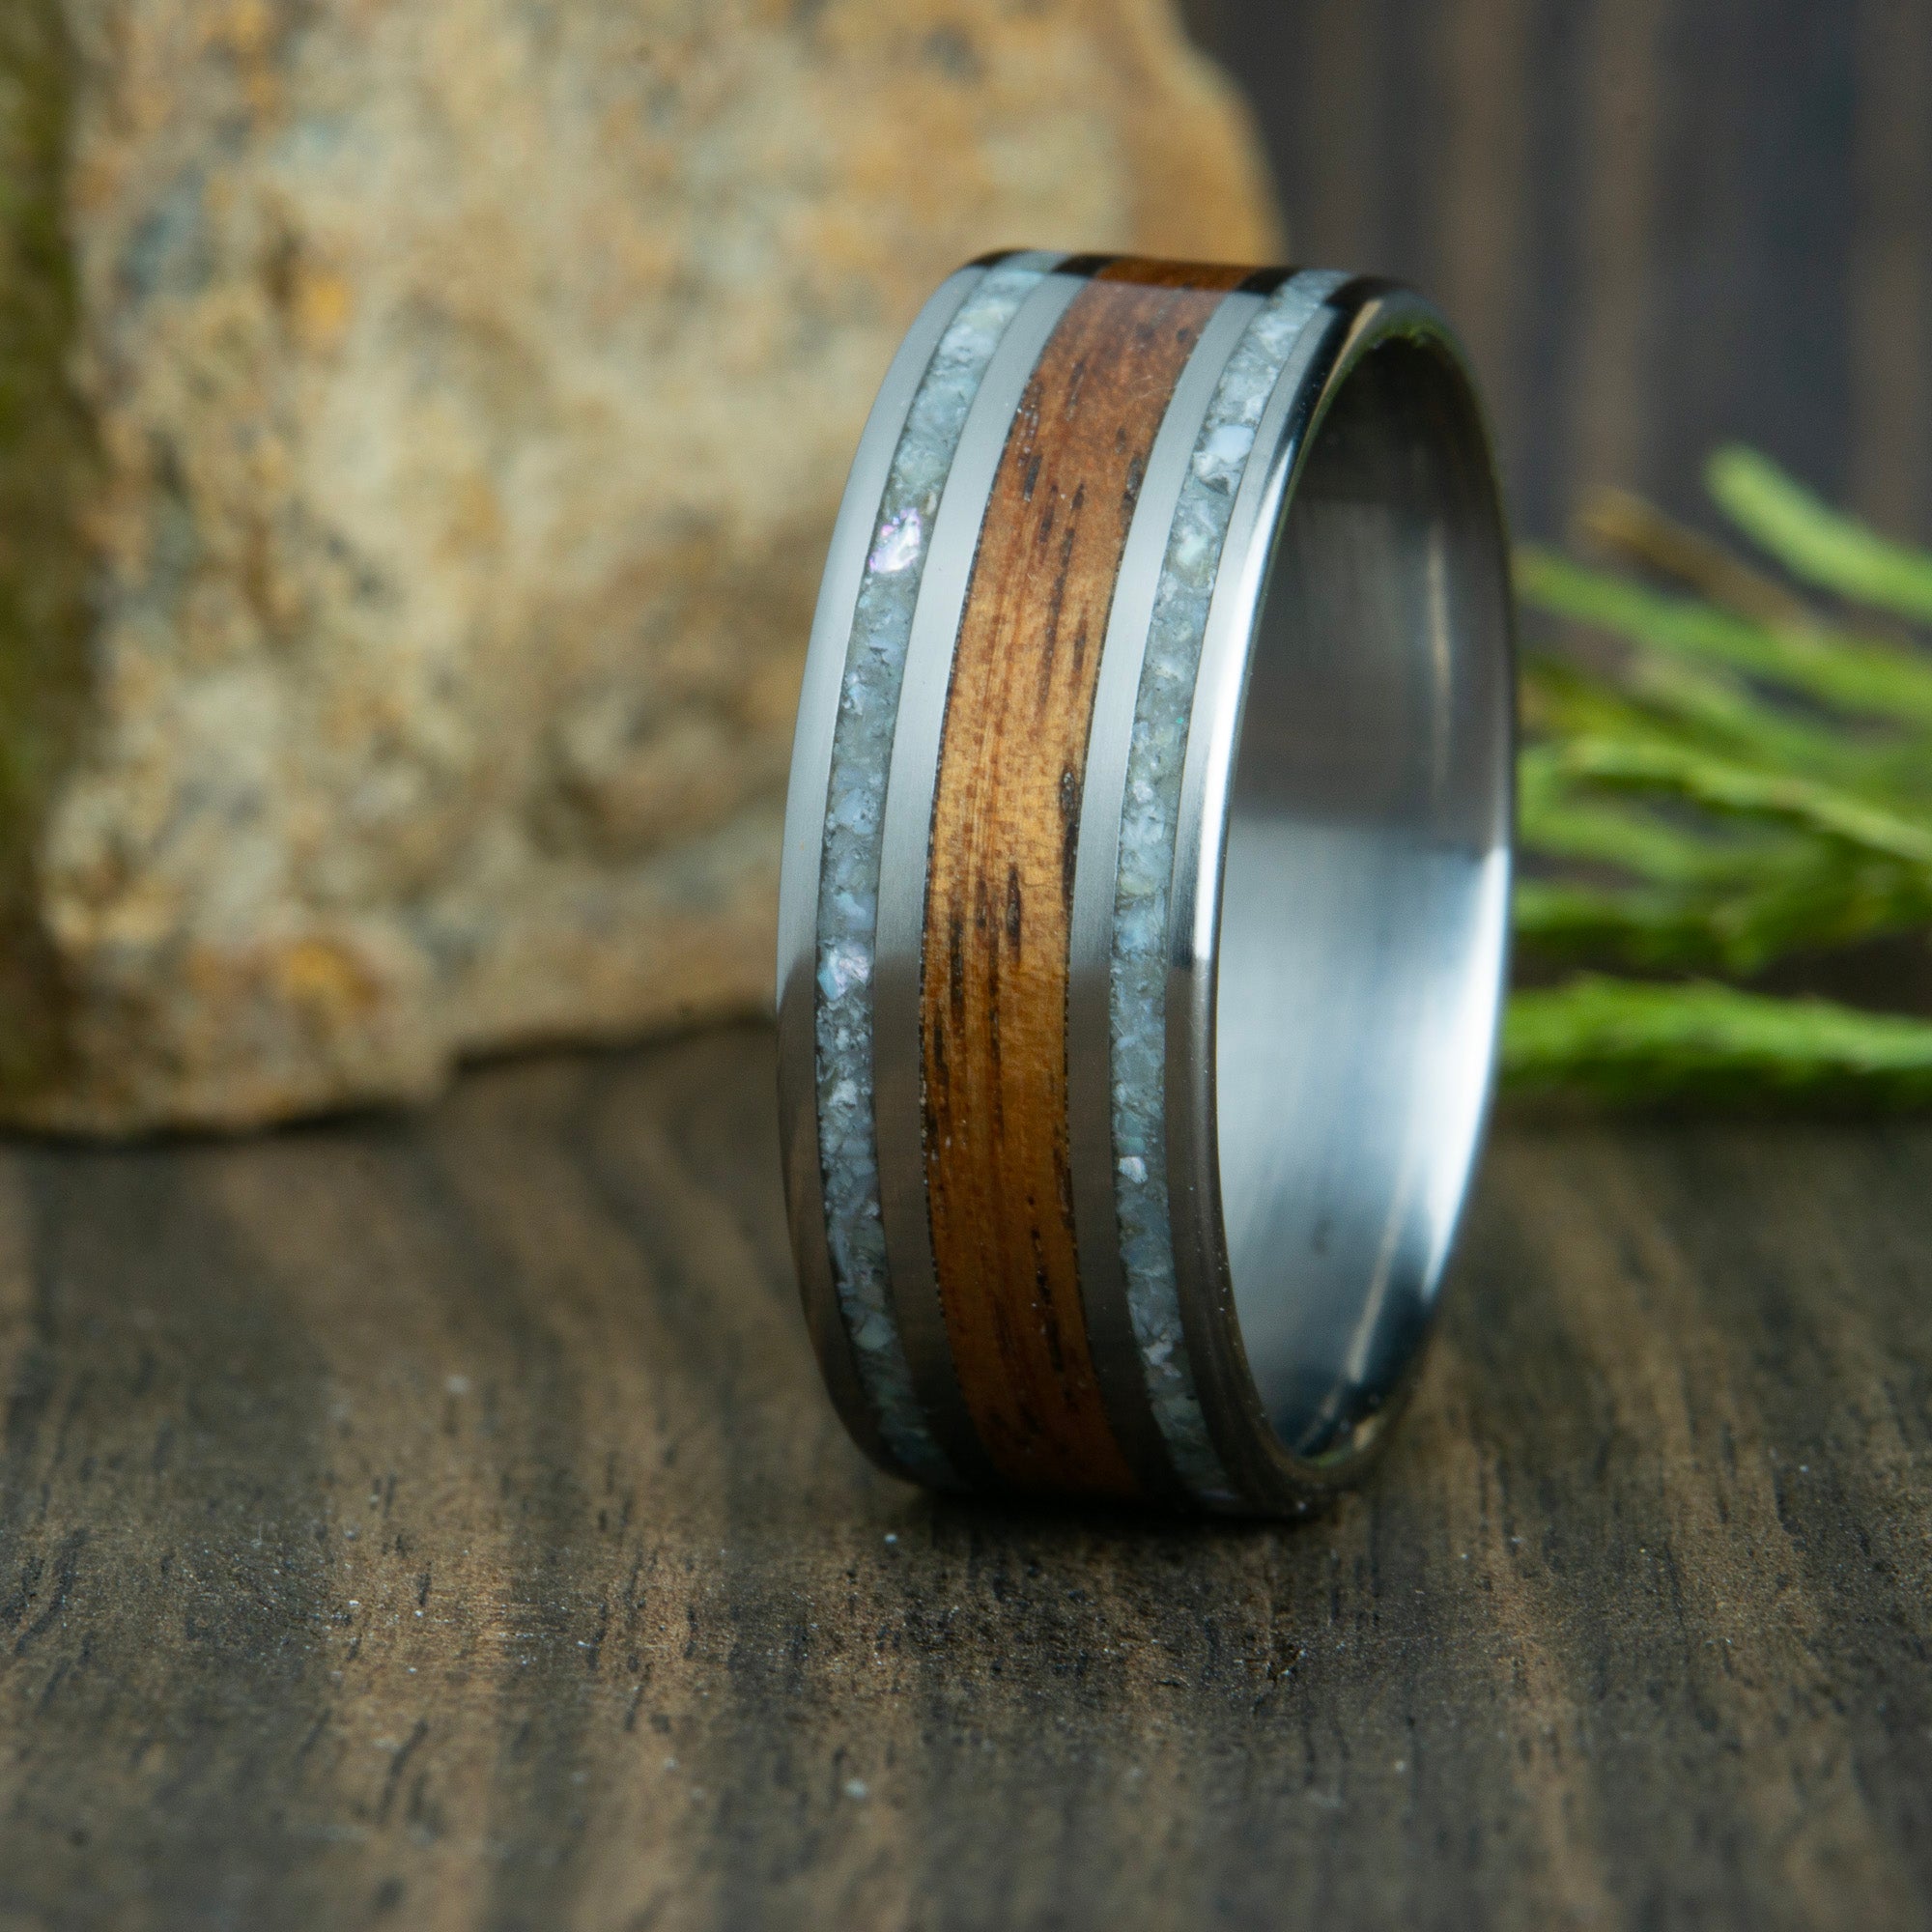 Koa wood ring with mother of pearl inlay